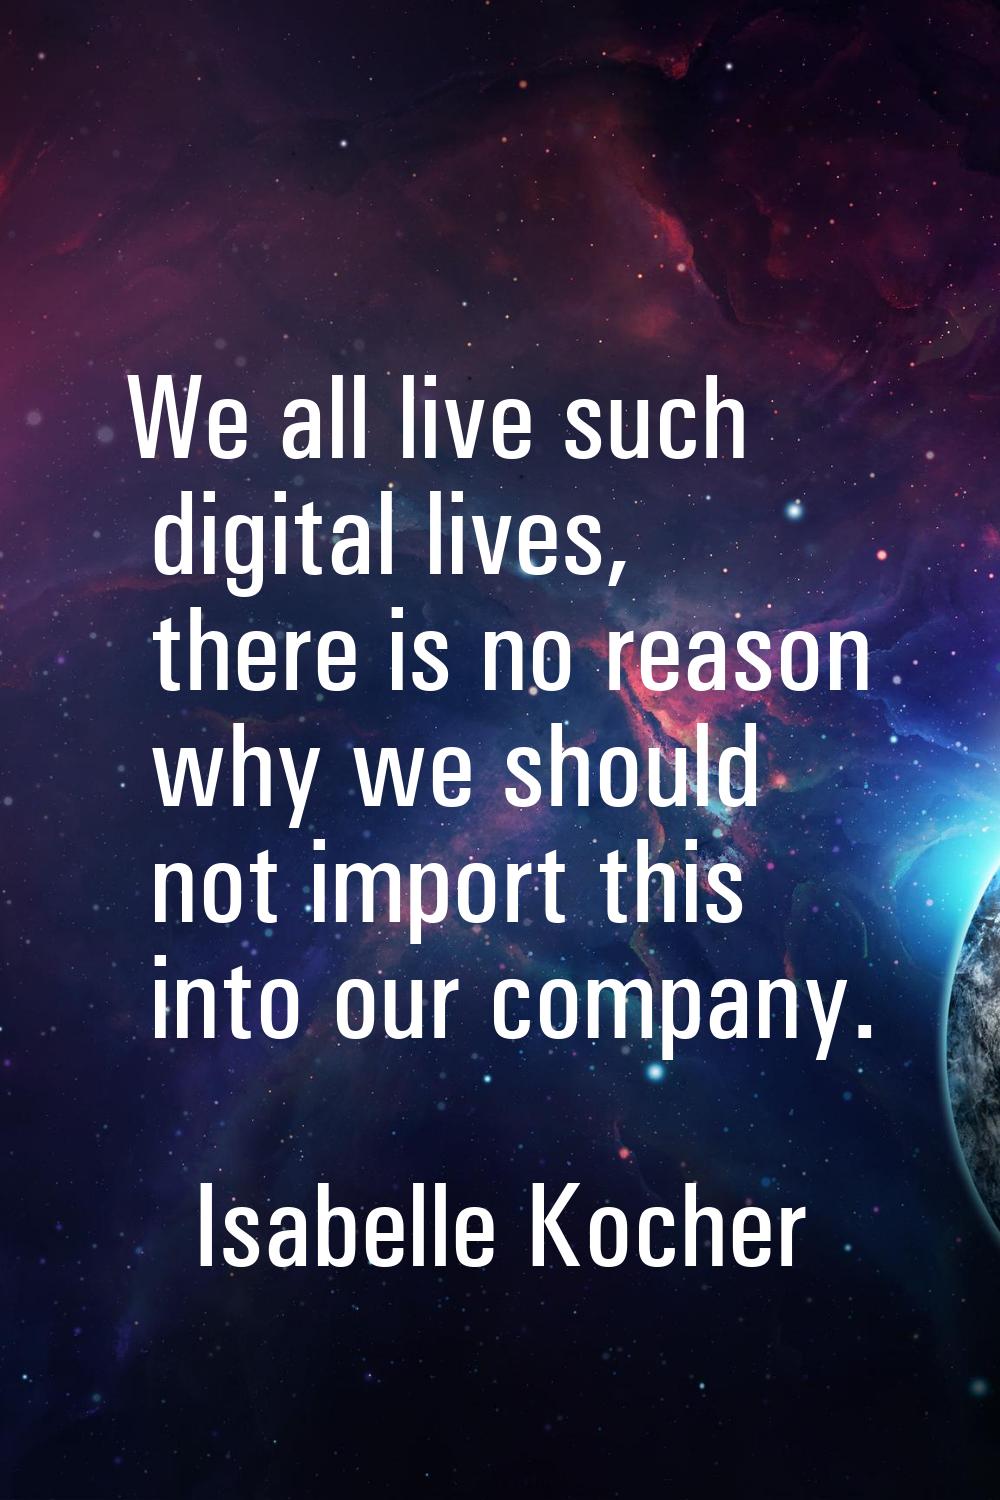 We all live such digital lives, there is no reason why we should not import this into our company.